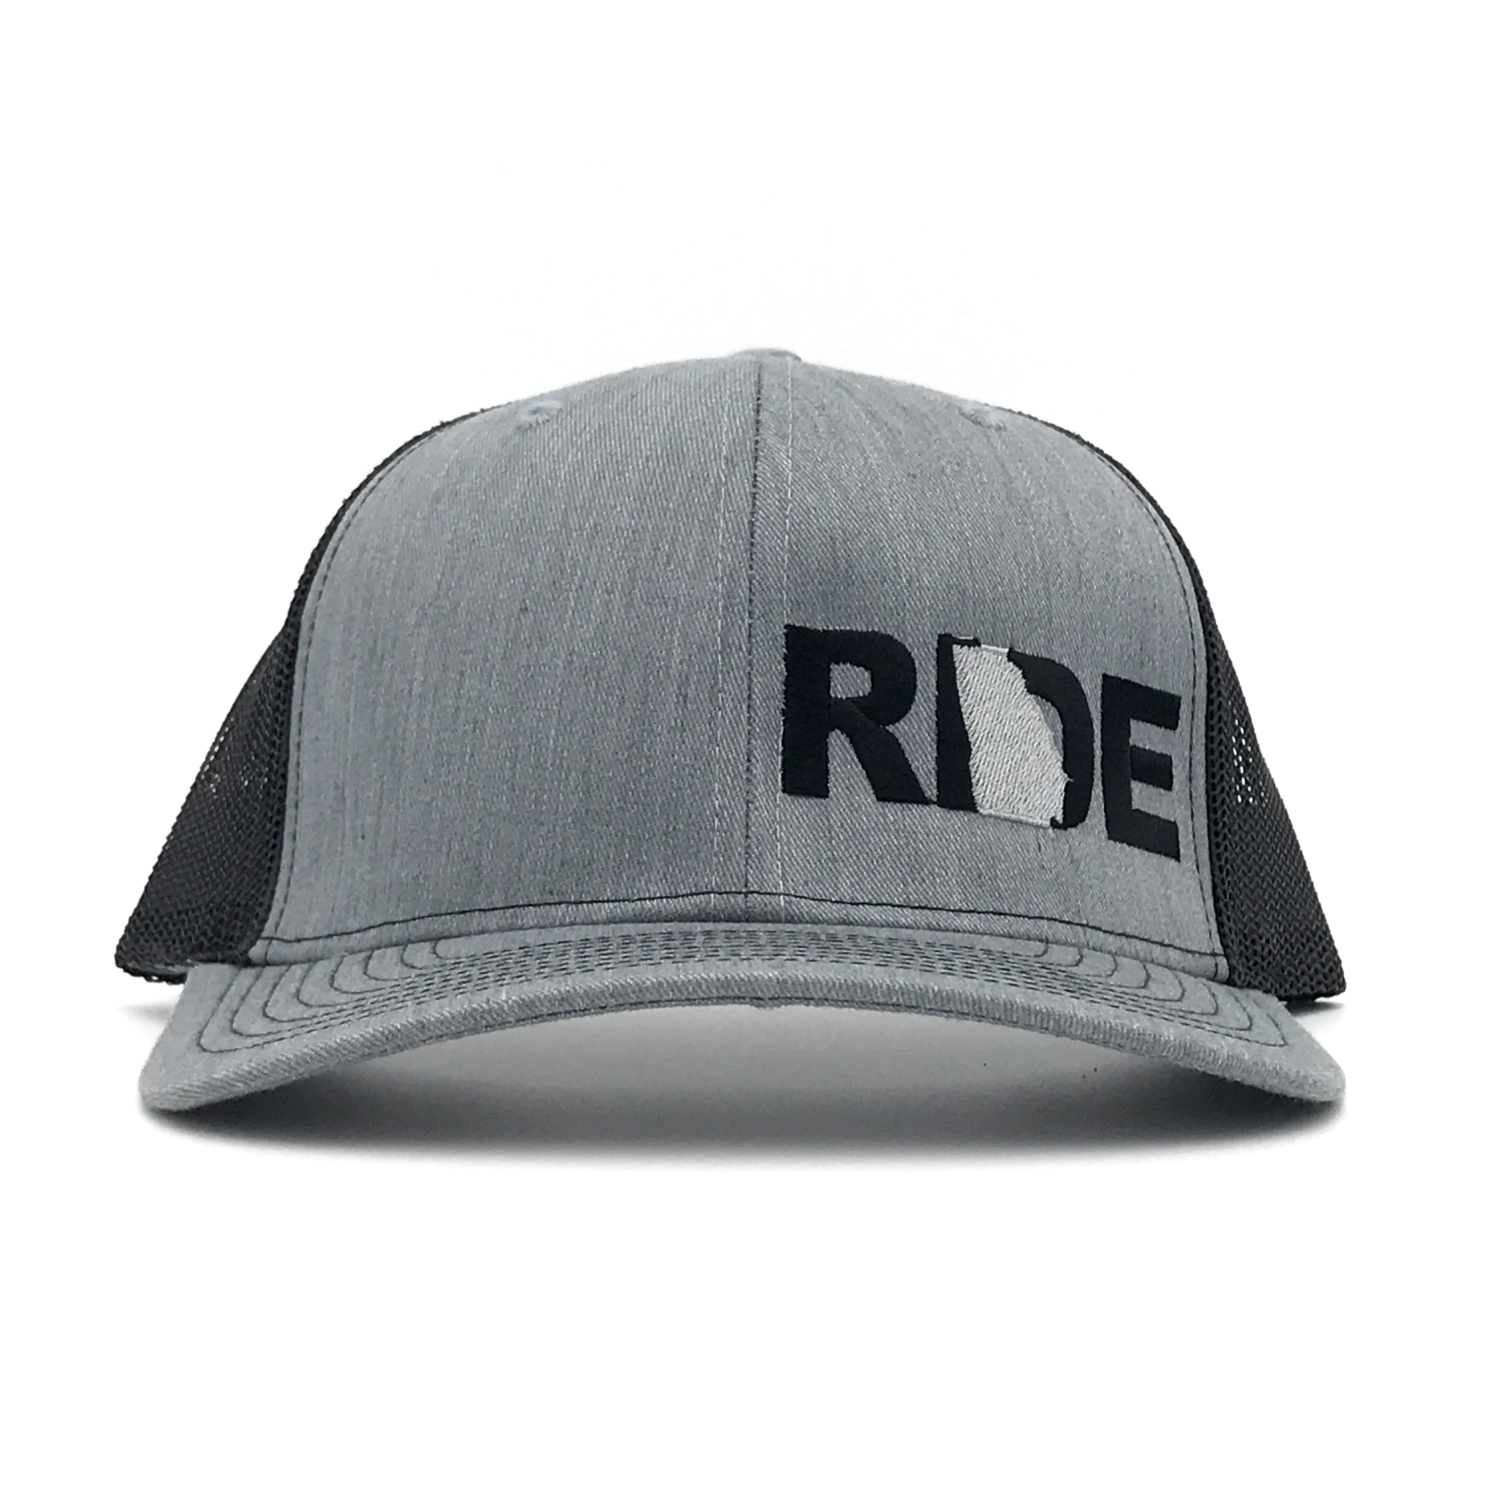 Ride Georgia Night Out Pro Embroidered Snapback Trucker Hat Heather Gray/Black